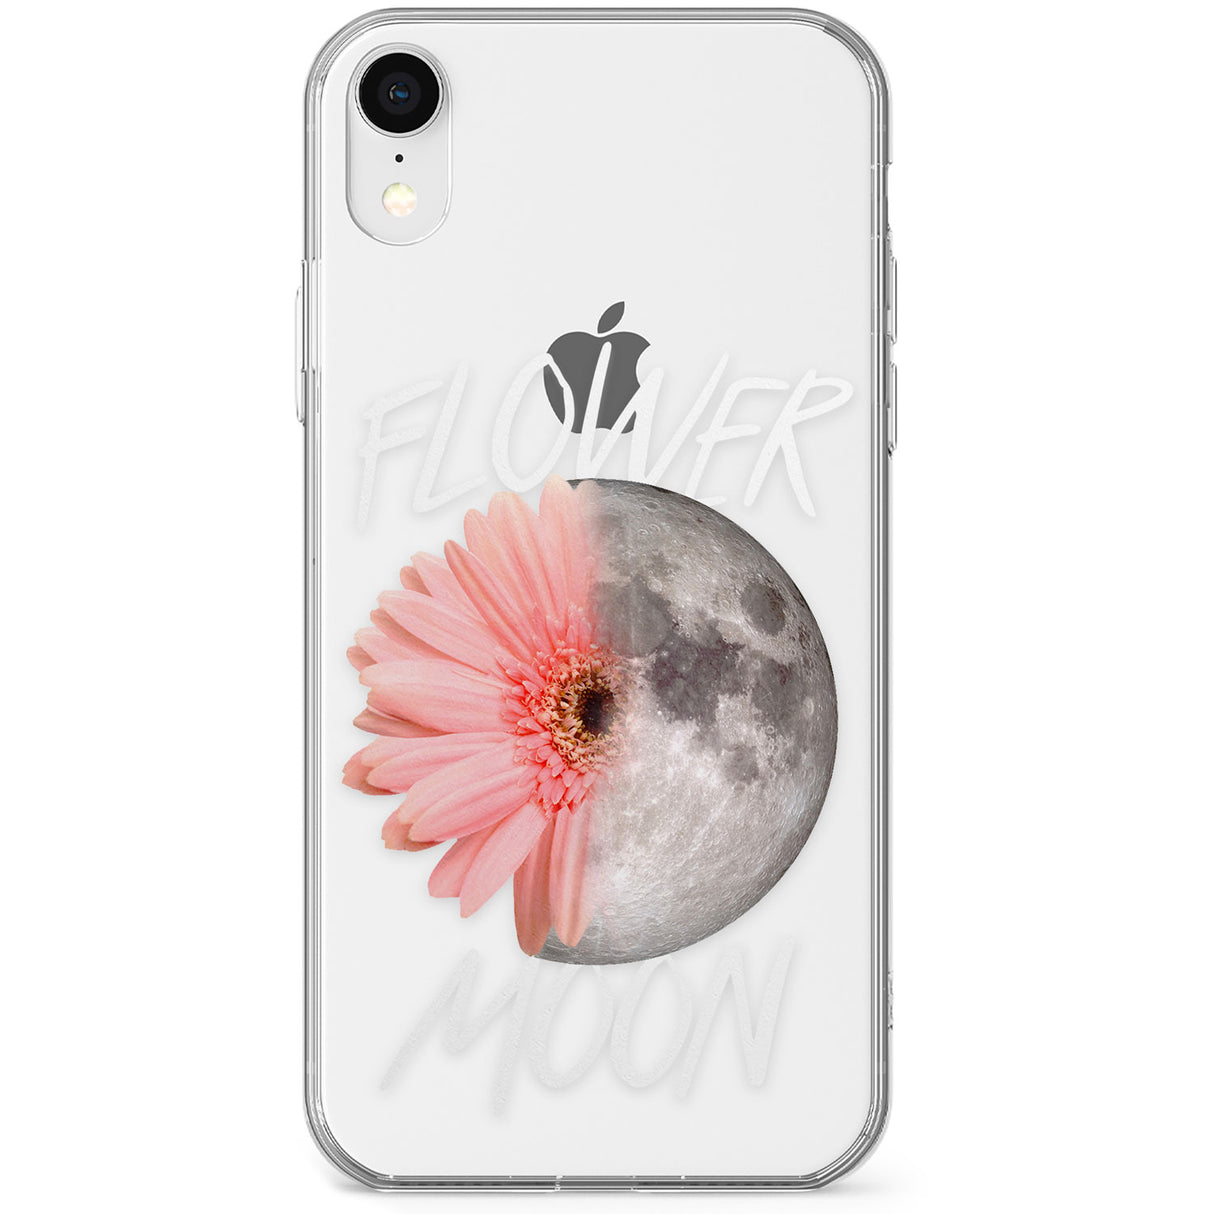 Flower Moon Phone Case for iPhone X, XS Max, XR